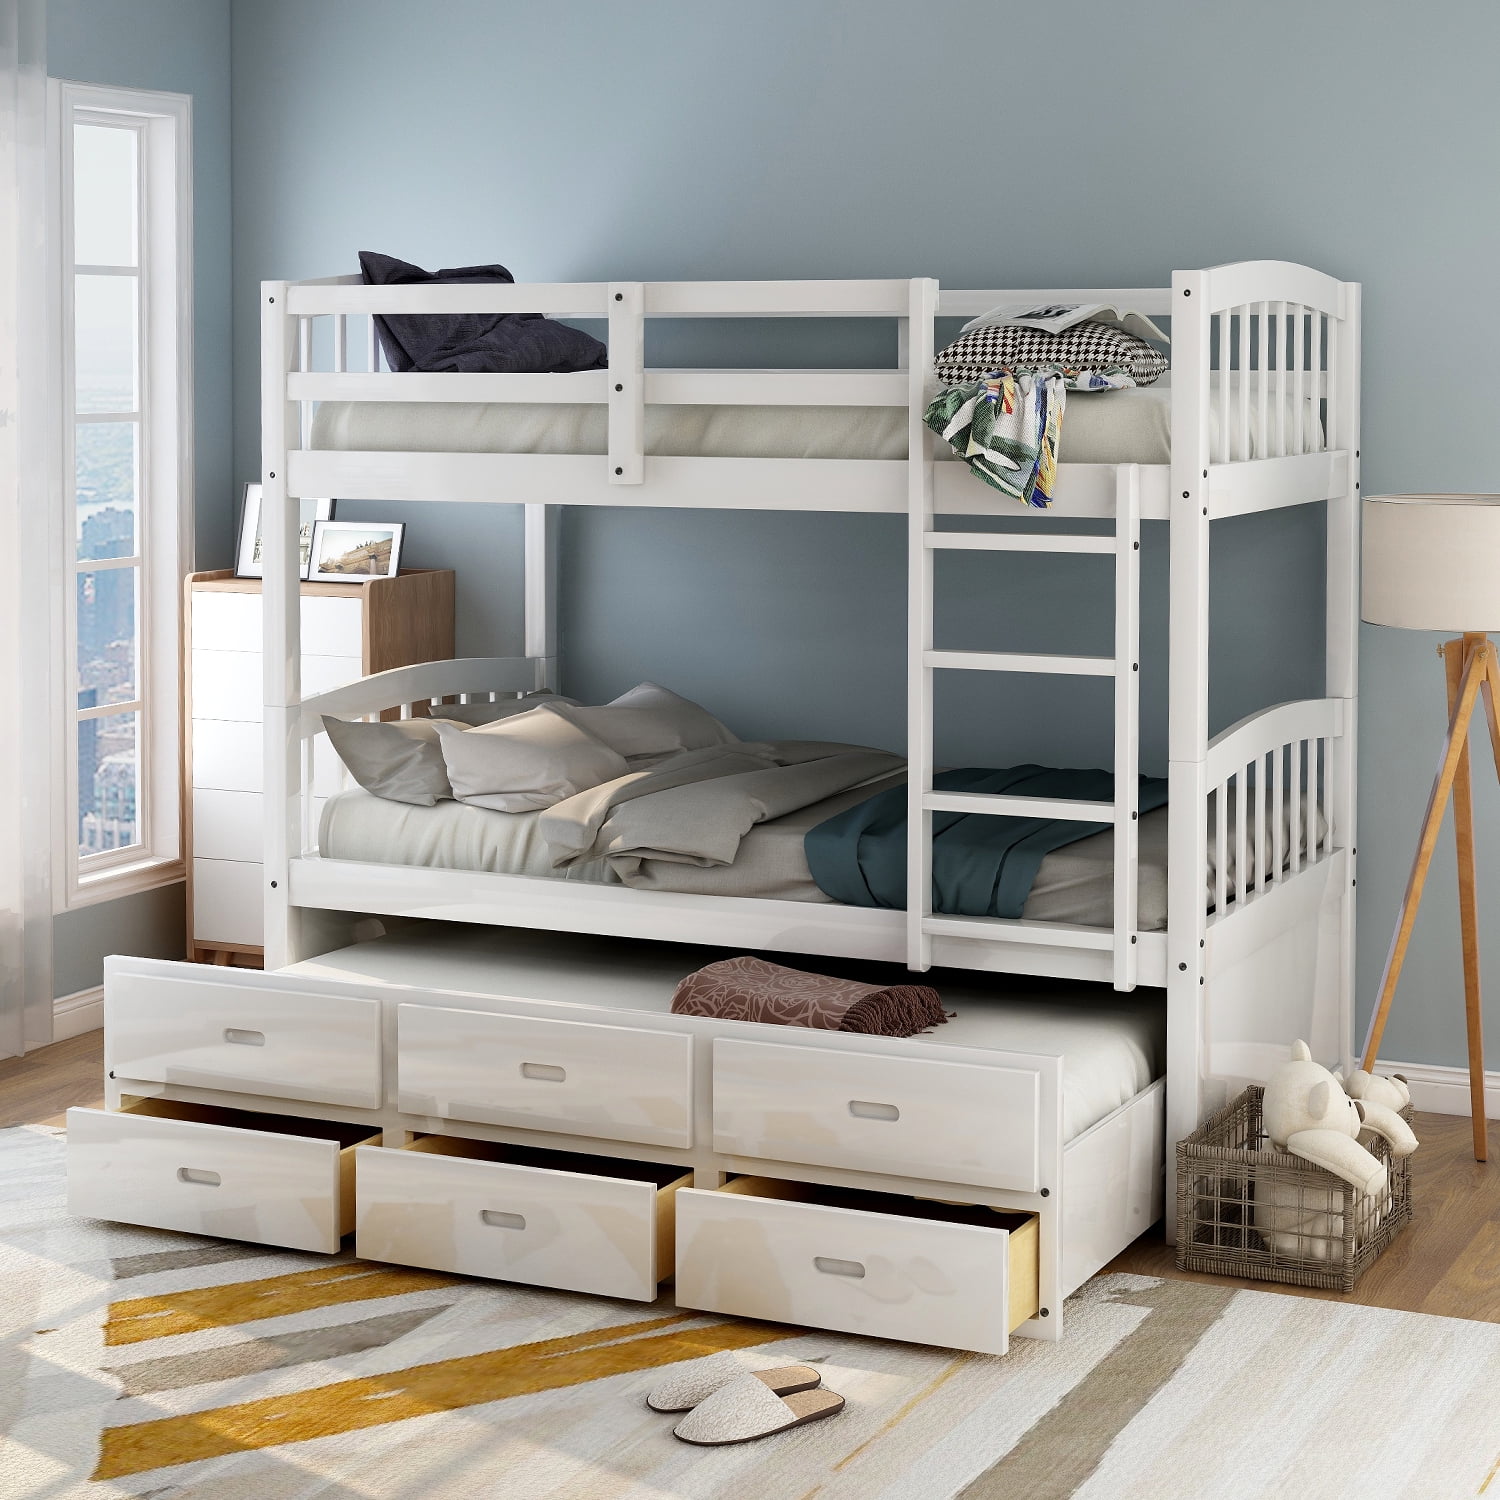 Euroco Twin Over Wood Bunk Bed, Twin Over Bunk Beds With Storage